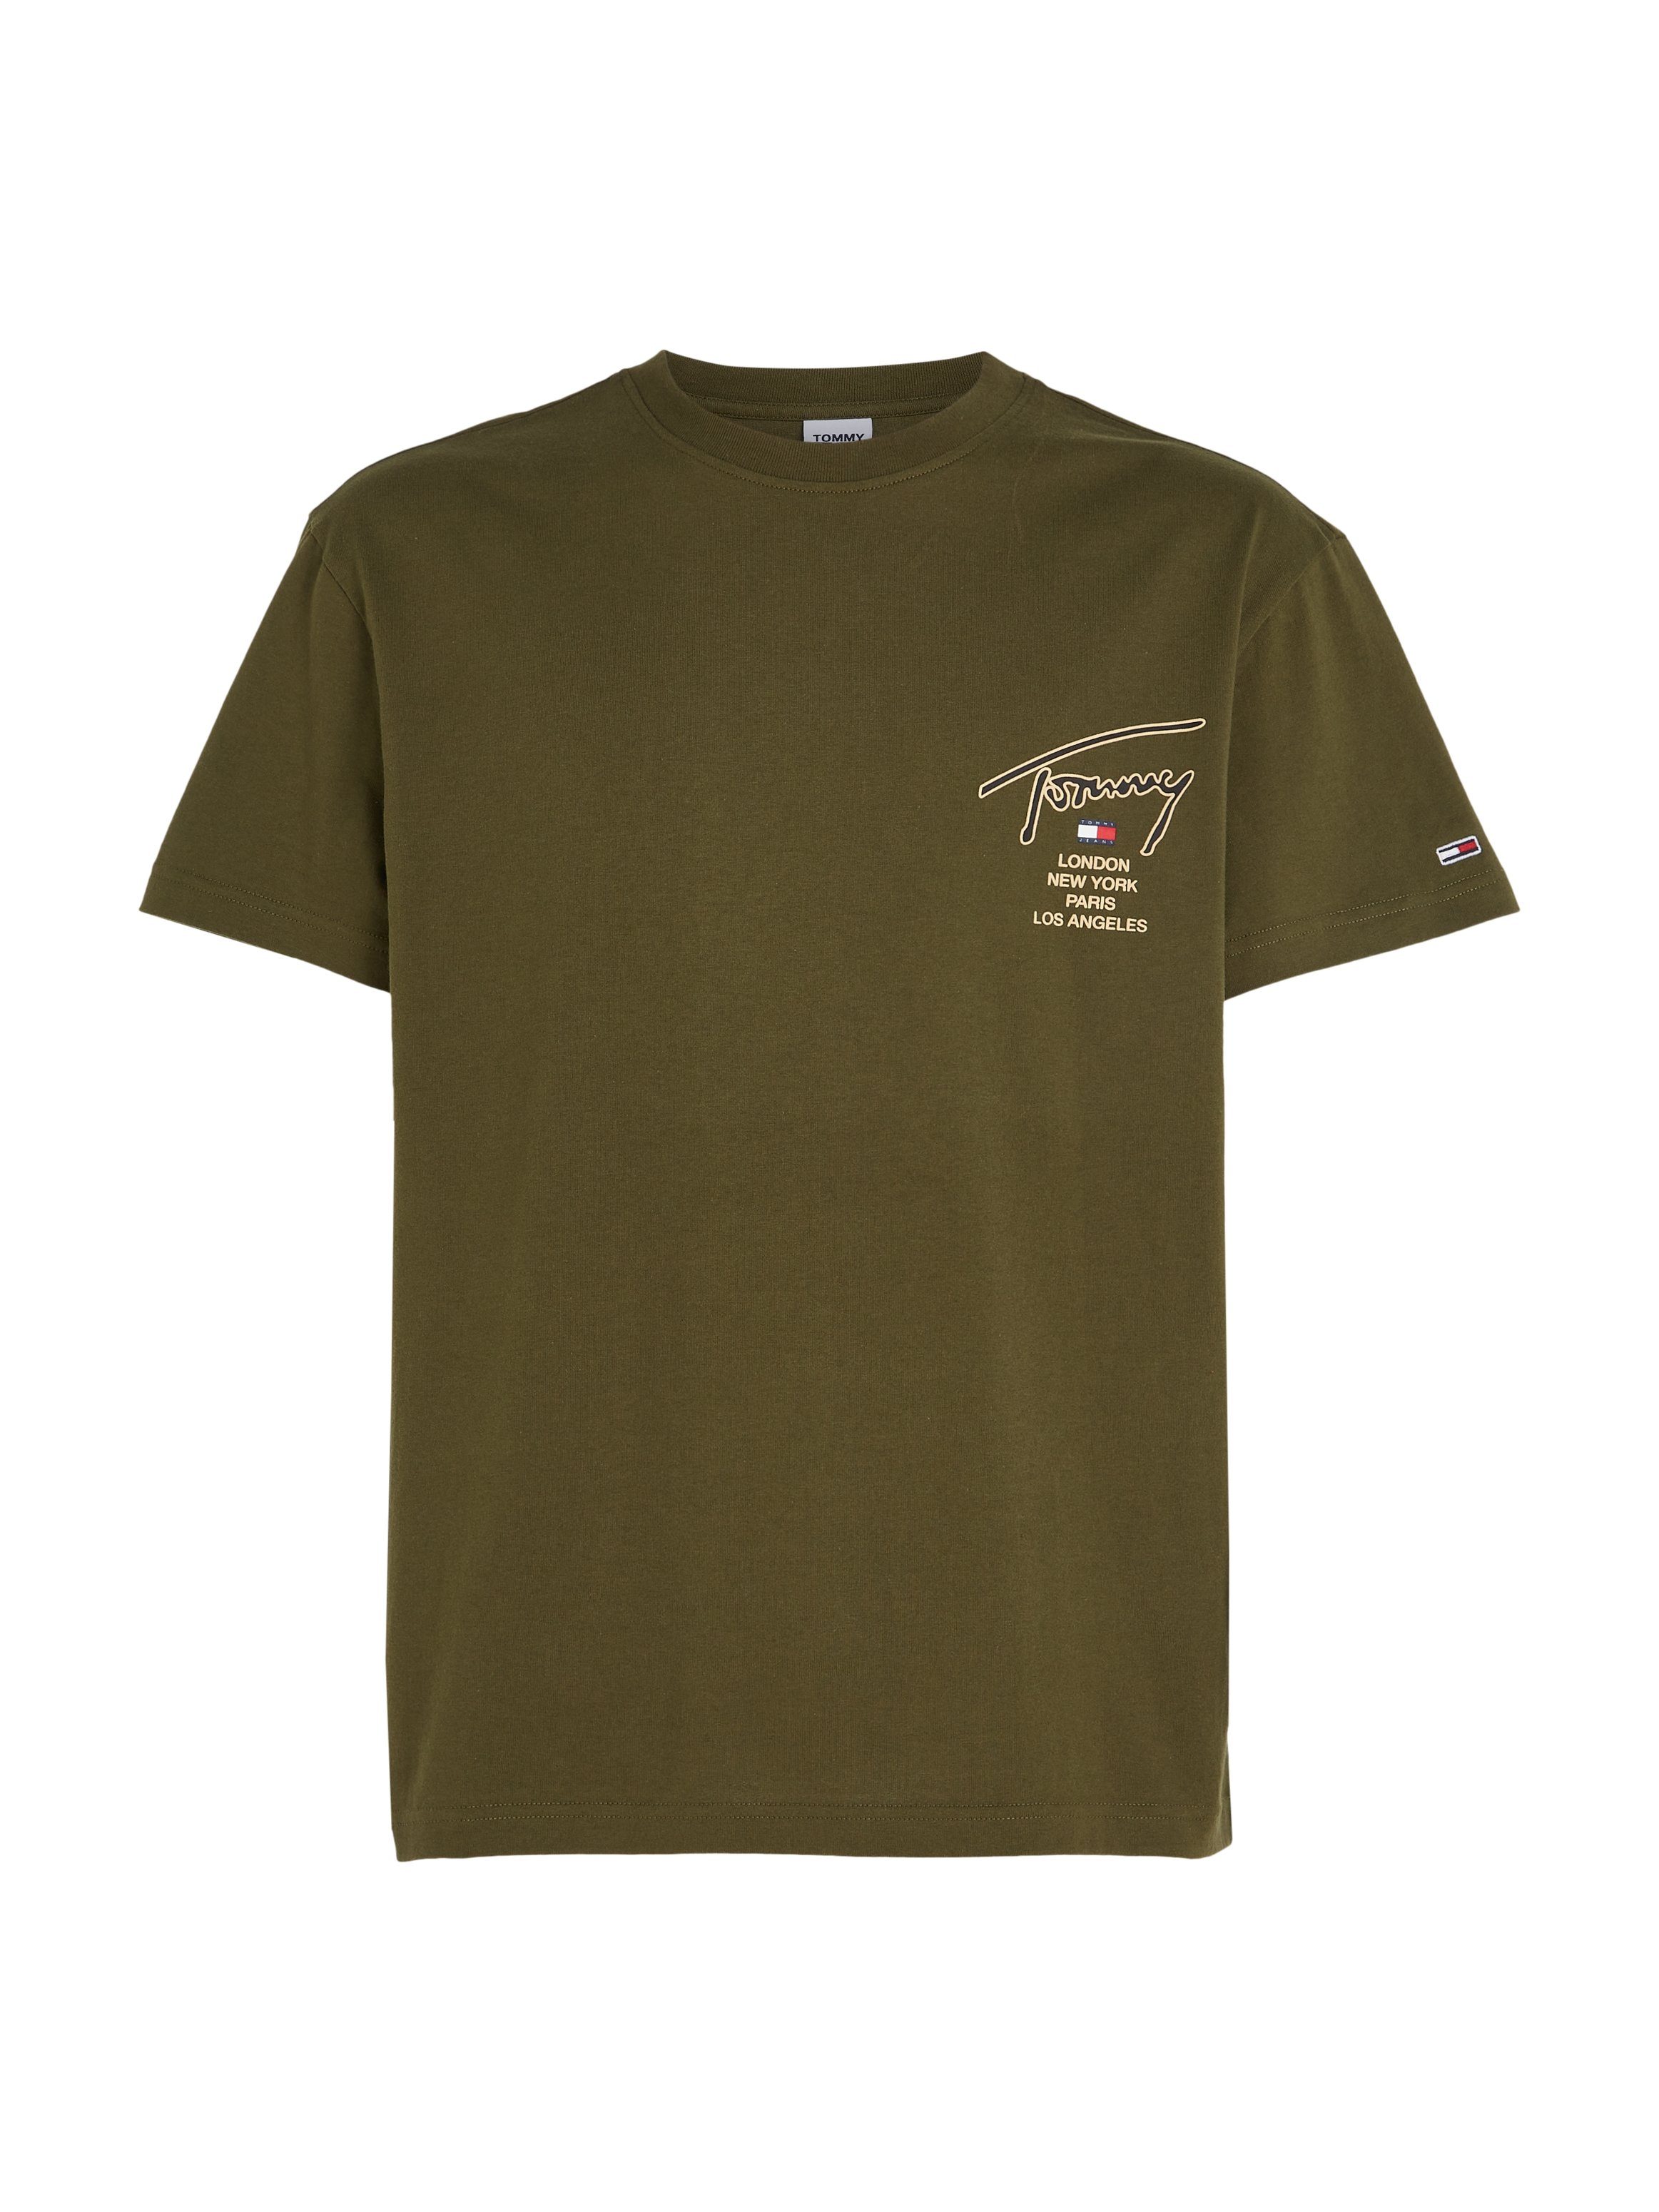 CLSC Green GOLD Tommy BACK SIGNATURE TEE T-Shirt Jeans TJM Olive Drab